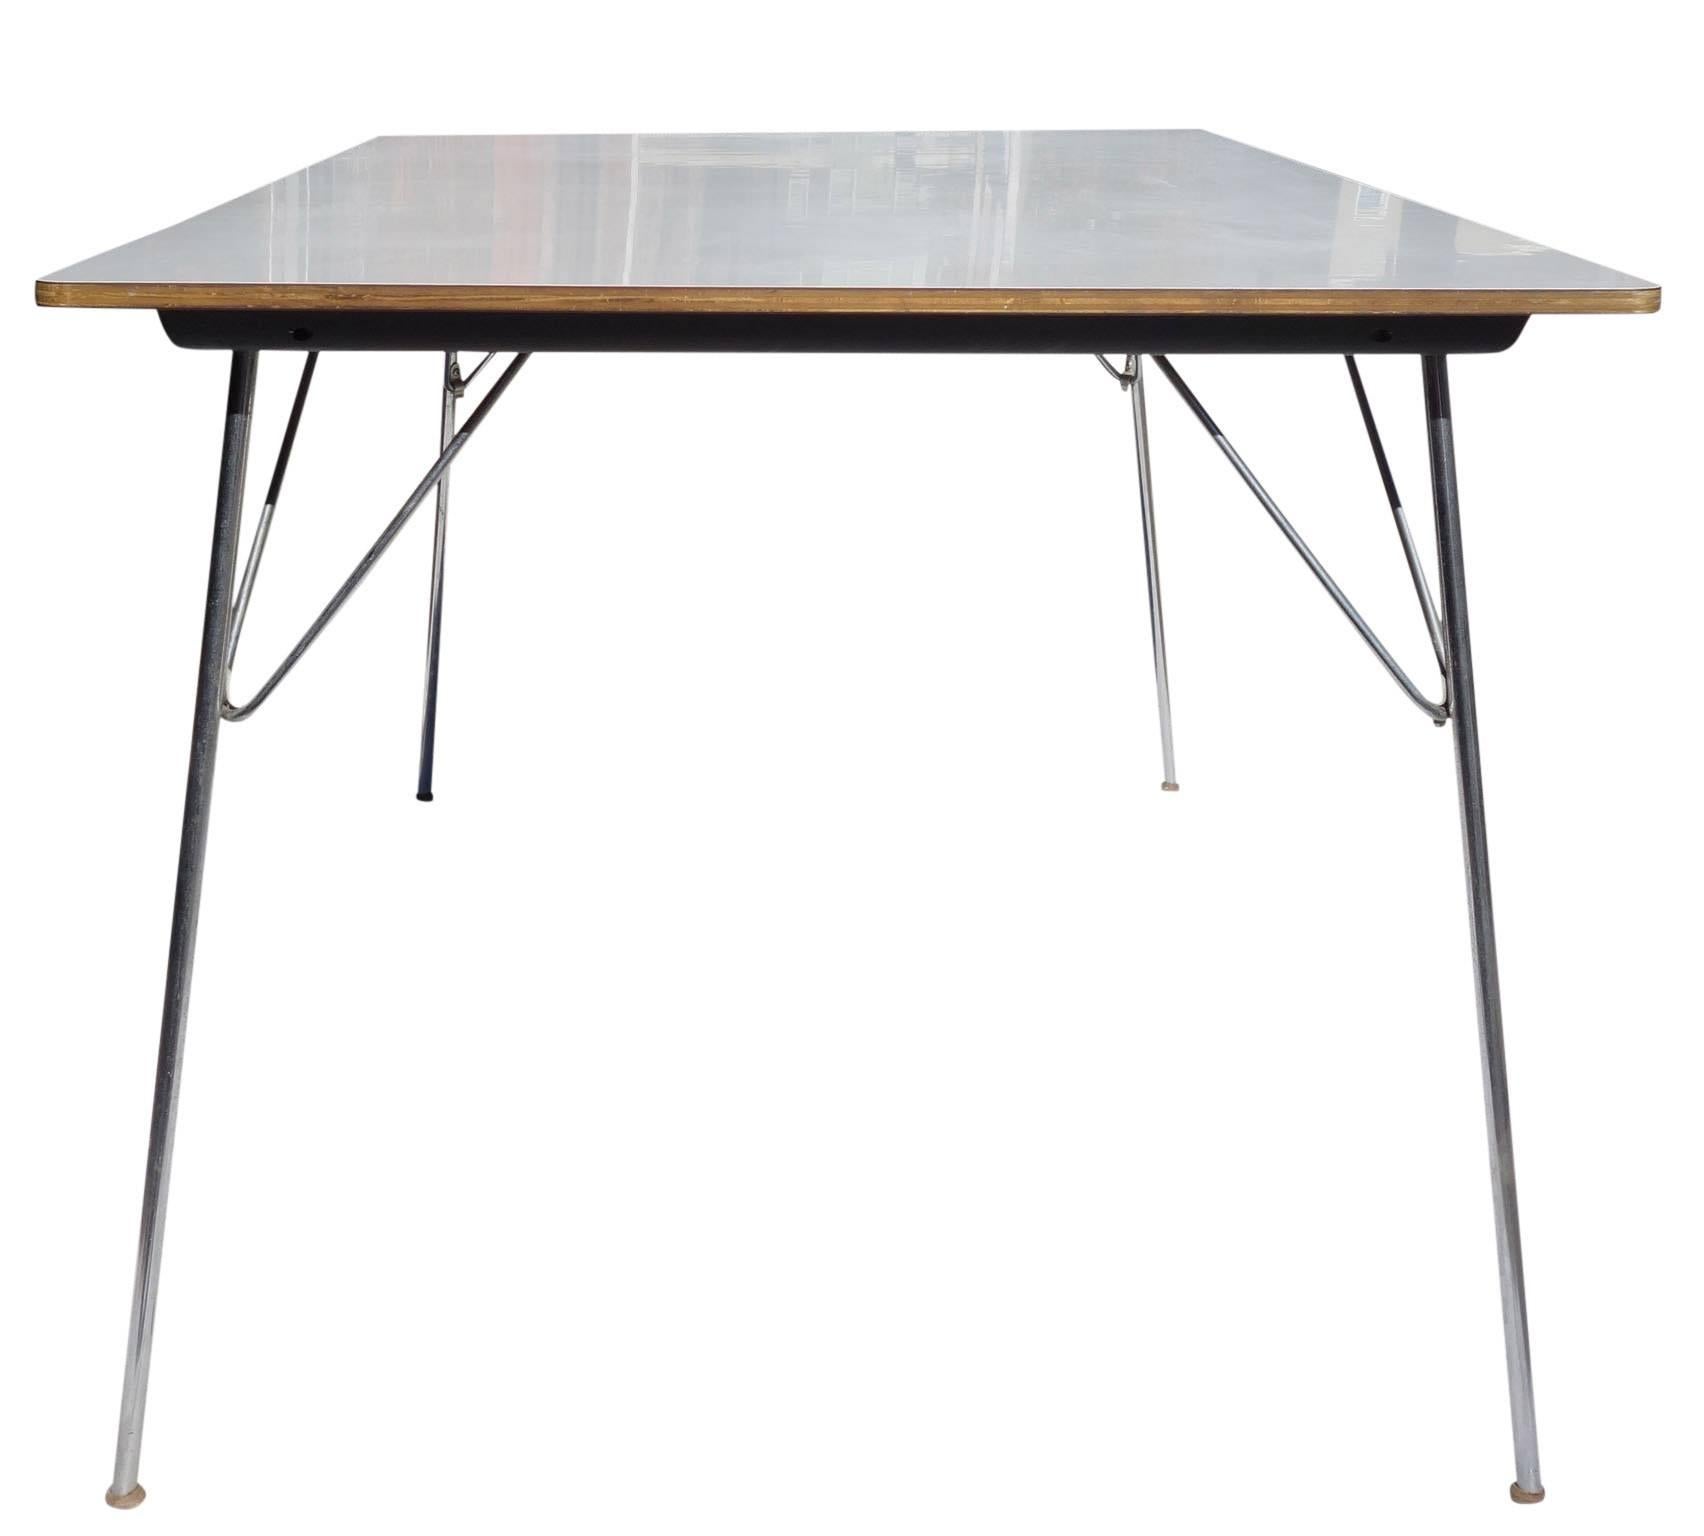 Wonderful example and highly function dining table by Charles and Ray Eames for Herman Miller, 1954. Rectangular white laminate on birch top with folding chromed steel legs. All feet are present. Straps and label intact.